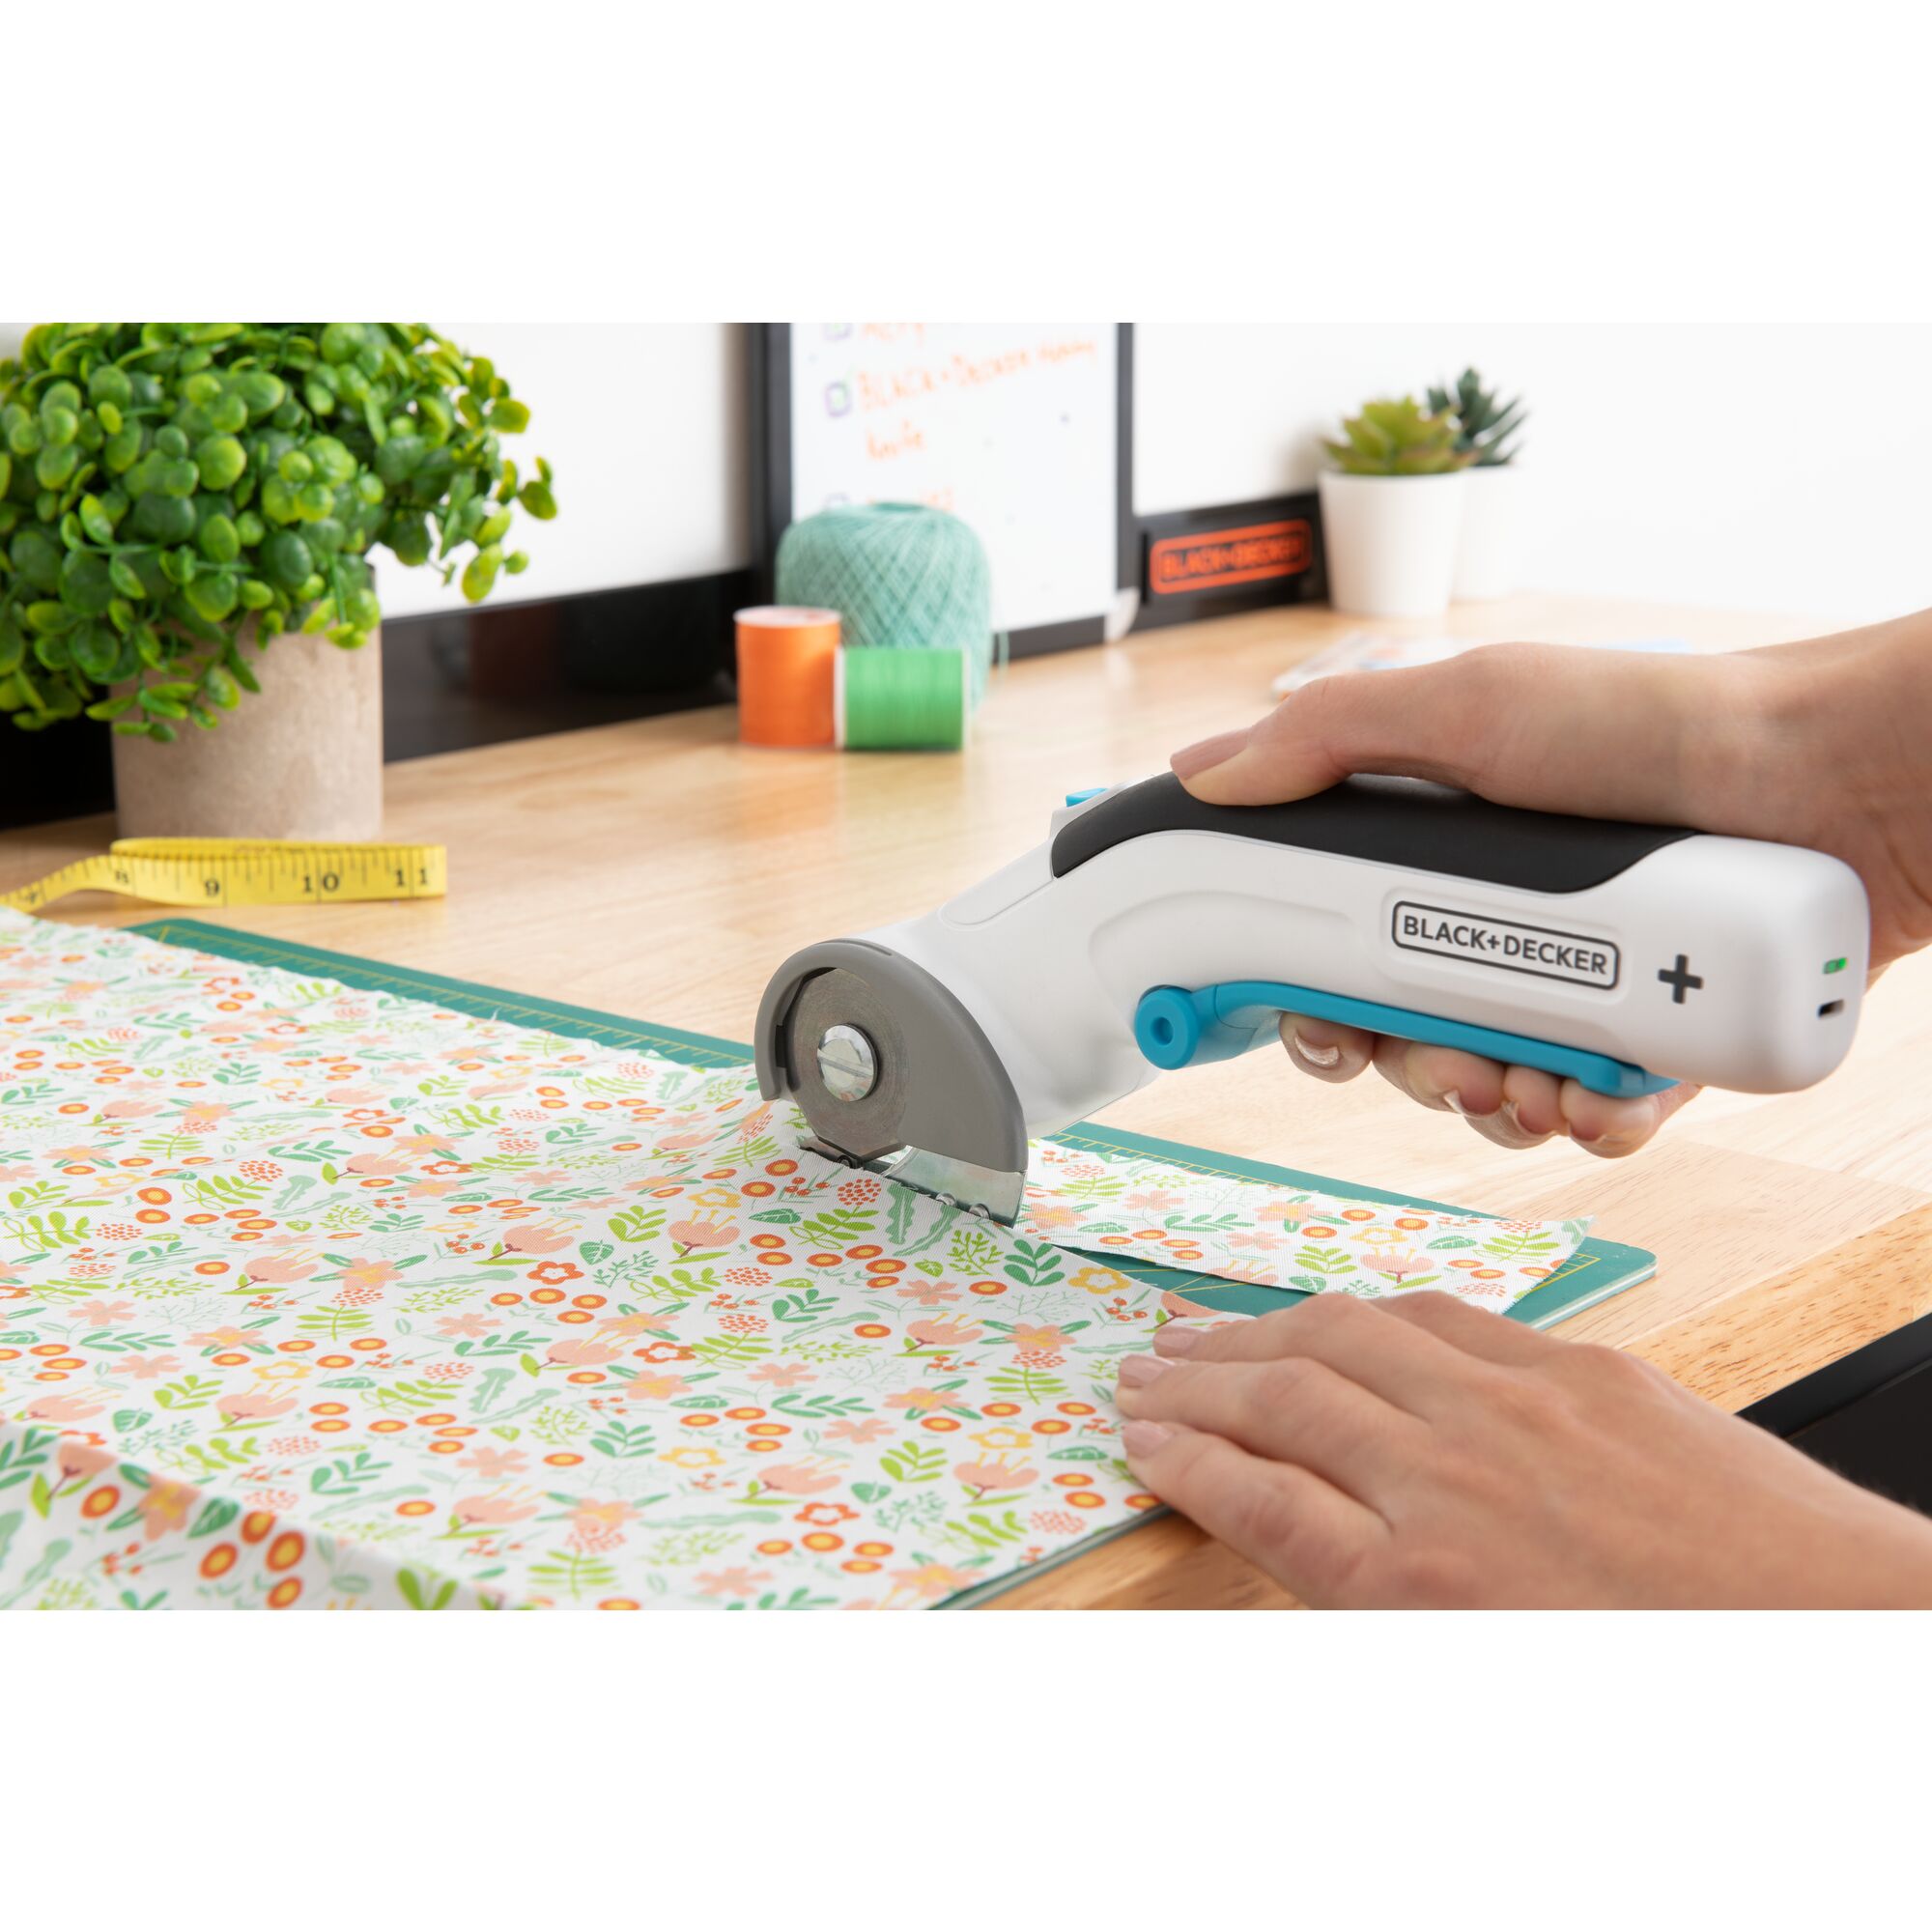 close-up of a BLACK+DECKER power rotary cutter being used to cut floral fabric